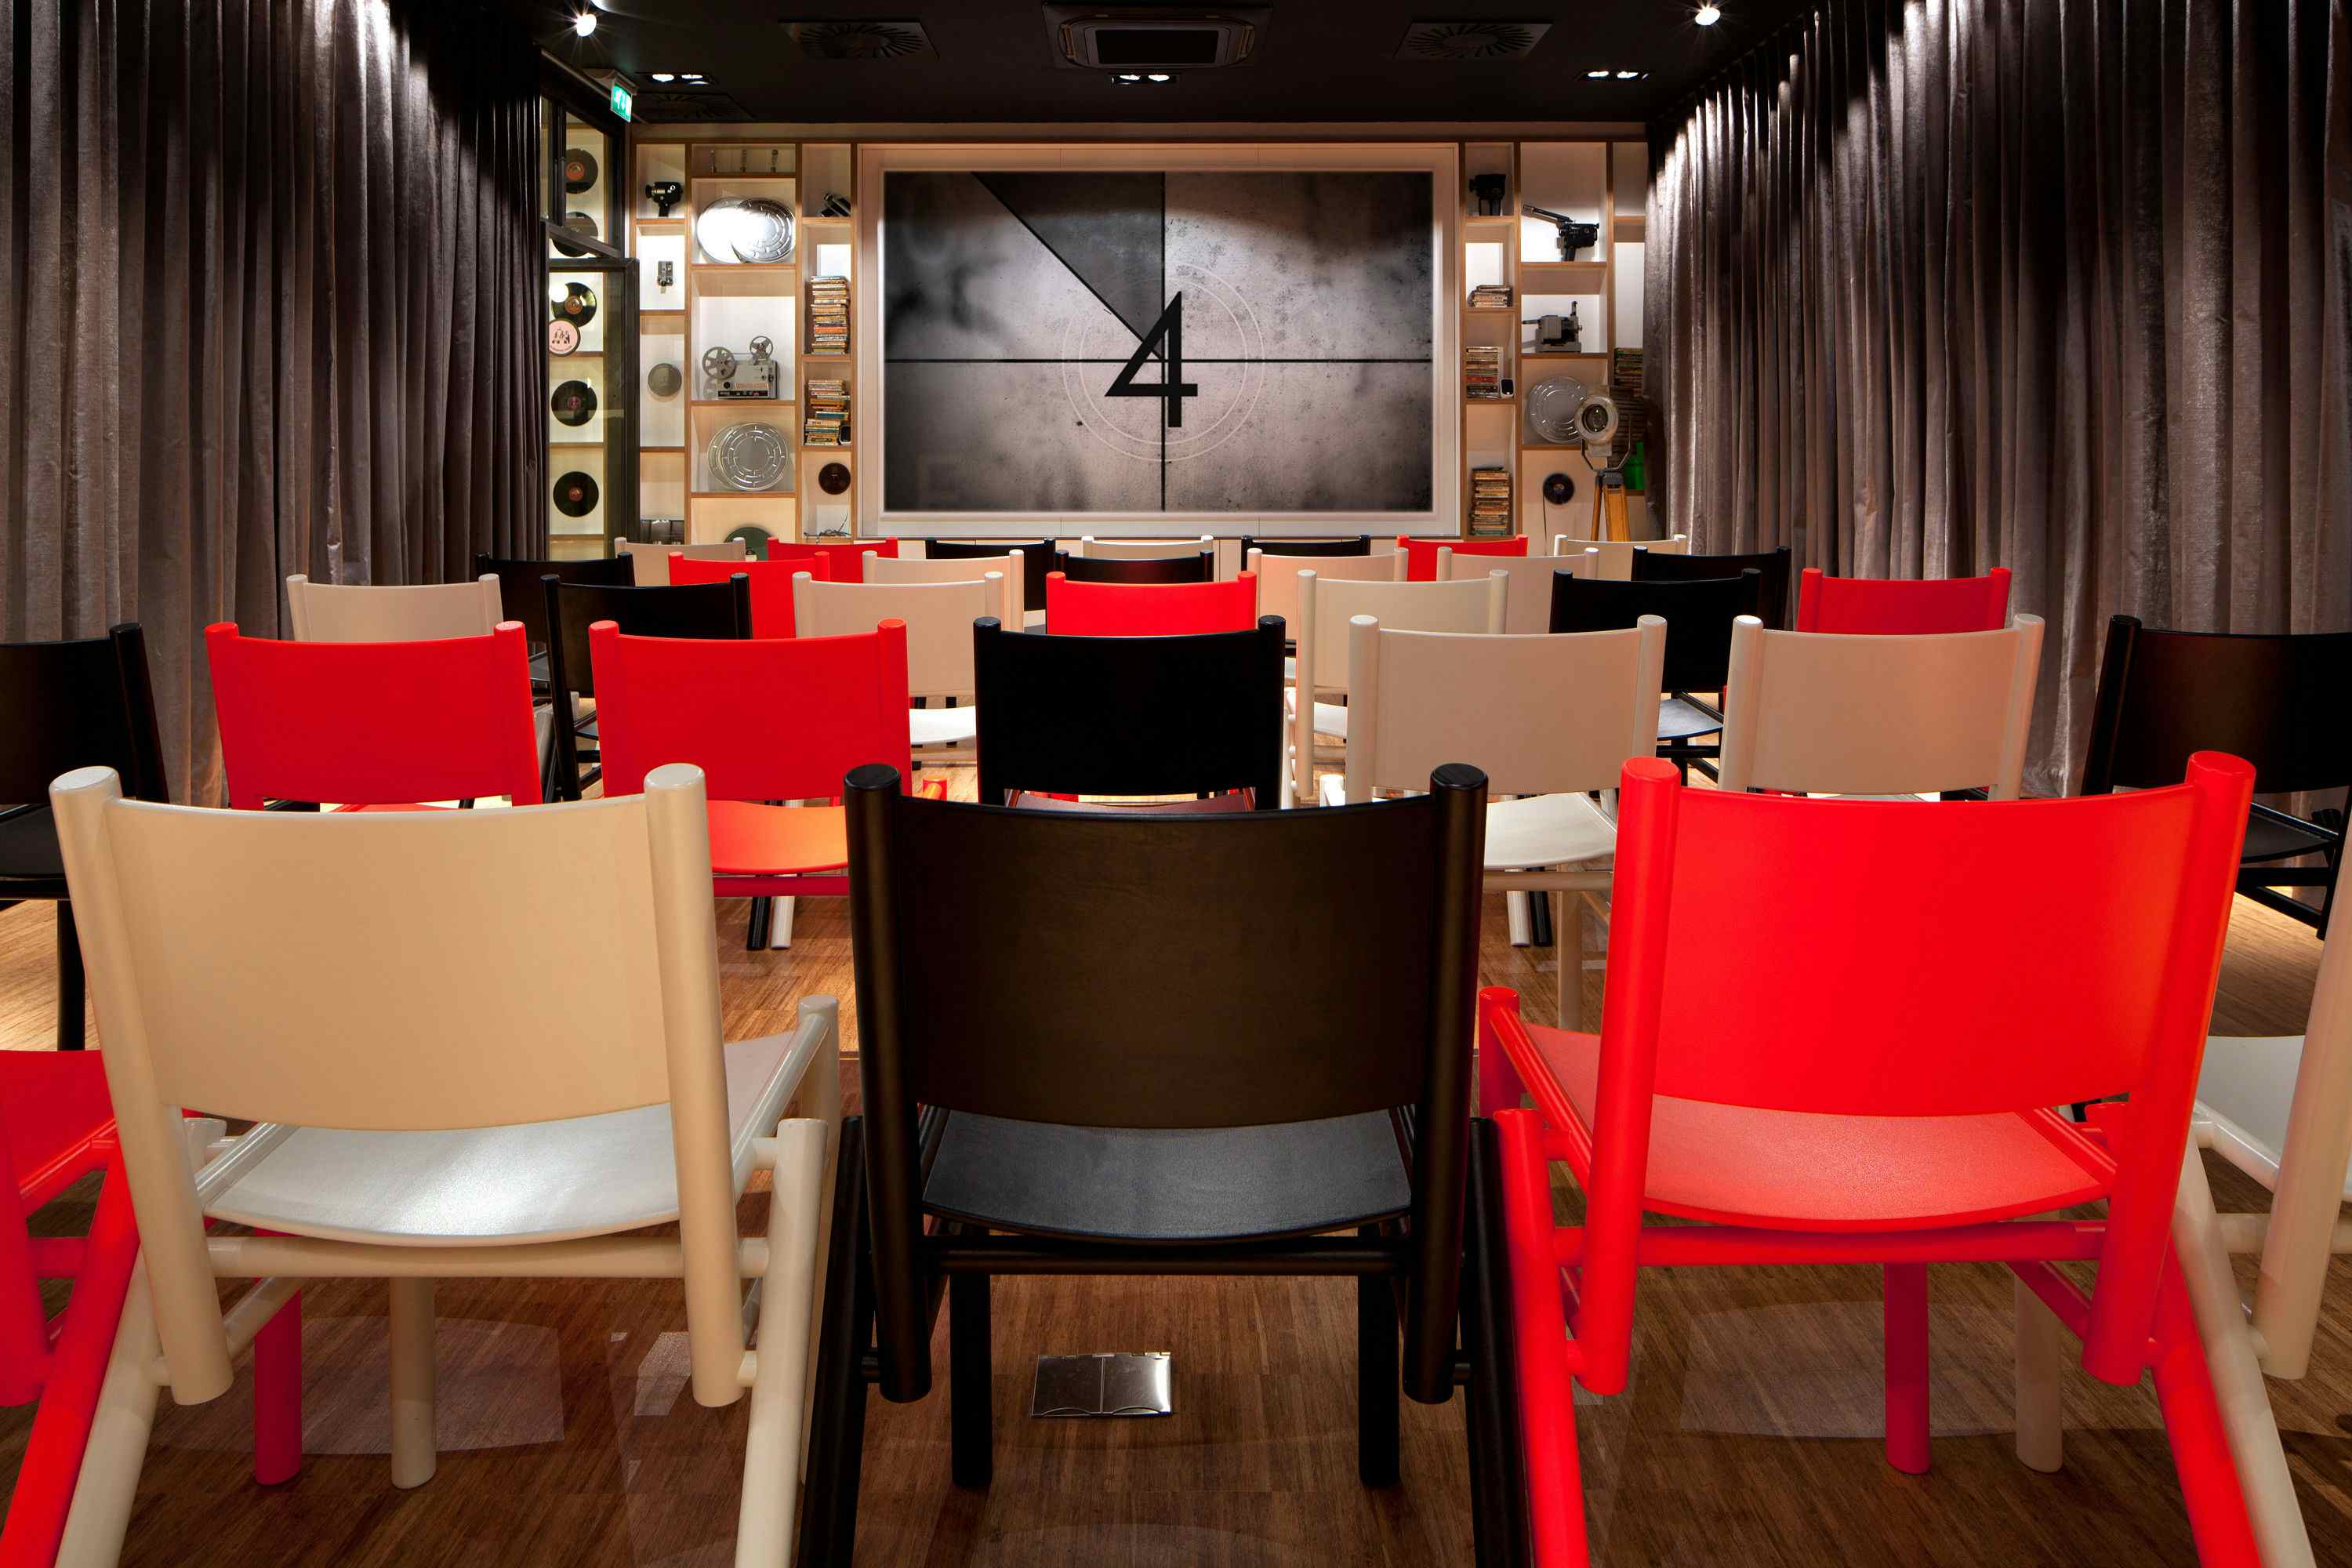 The Screening Room, citizenM Hotel